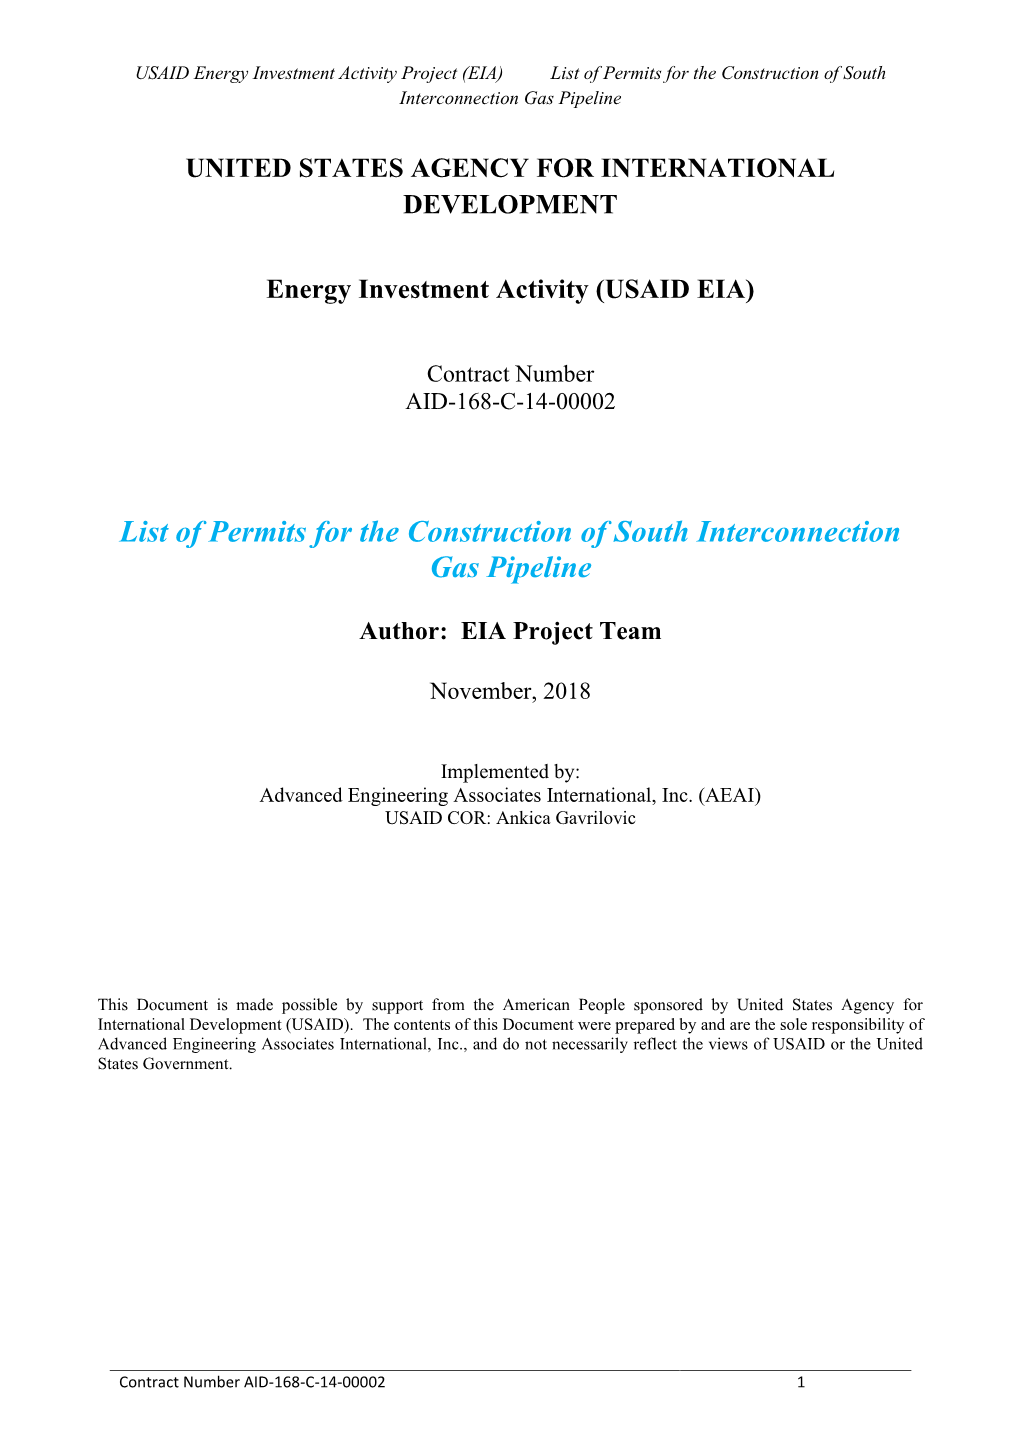 List of Permits for the Construction of South Interconnection Gas Pipeline